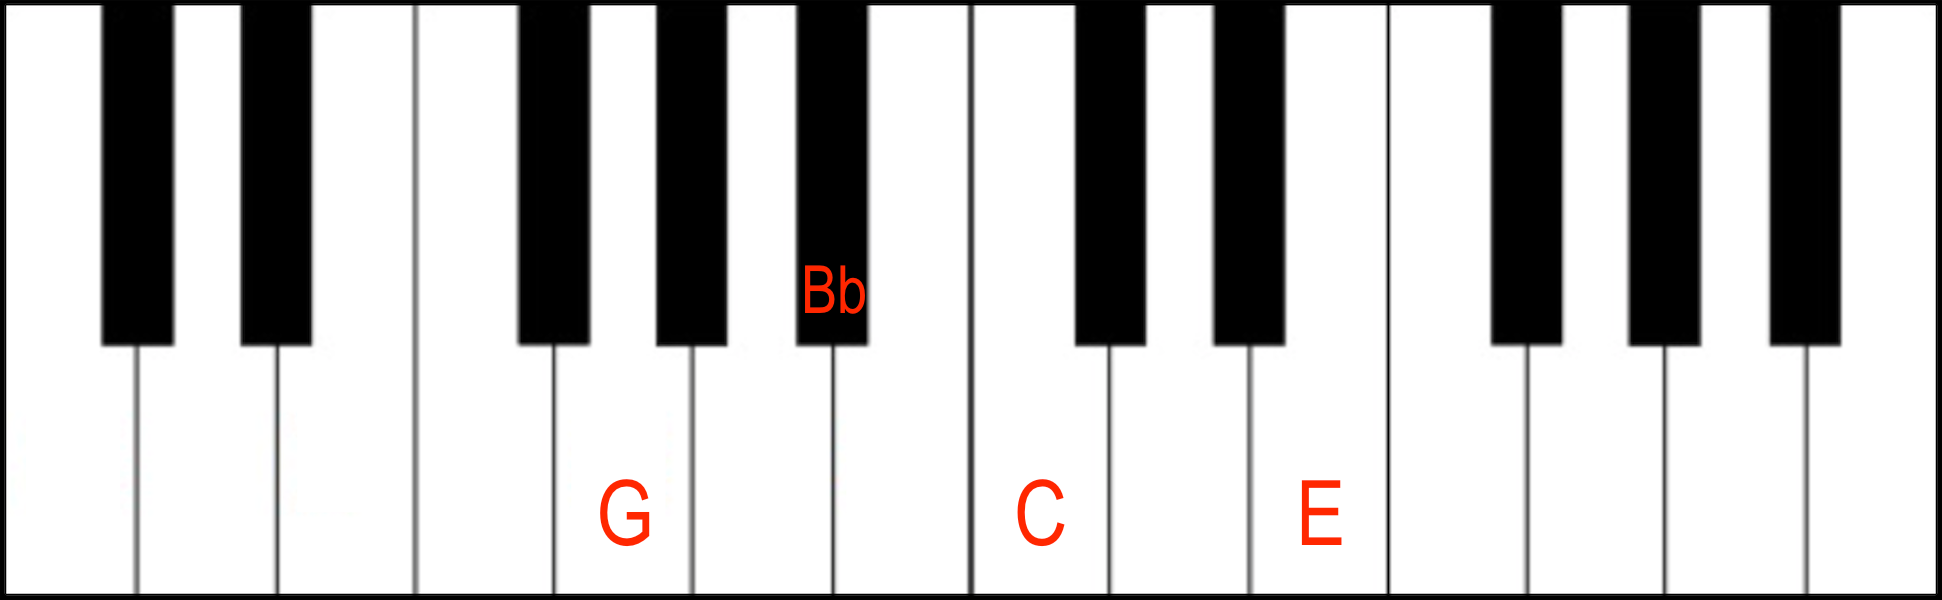 15 Must-Know Jazz Piano Chords! (With Piano Chord Charts)